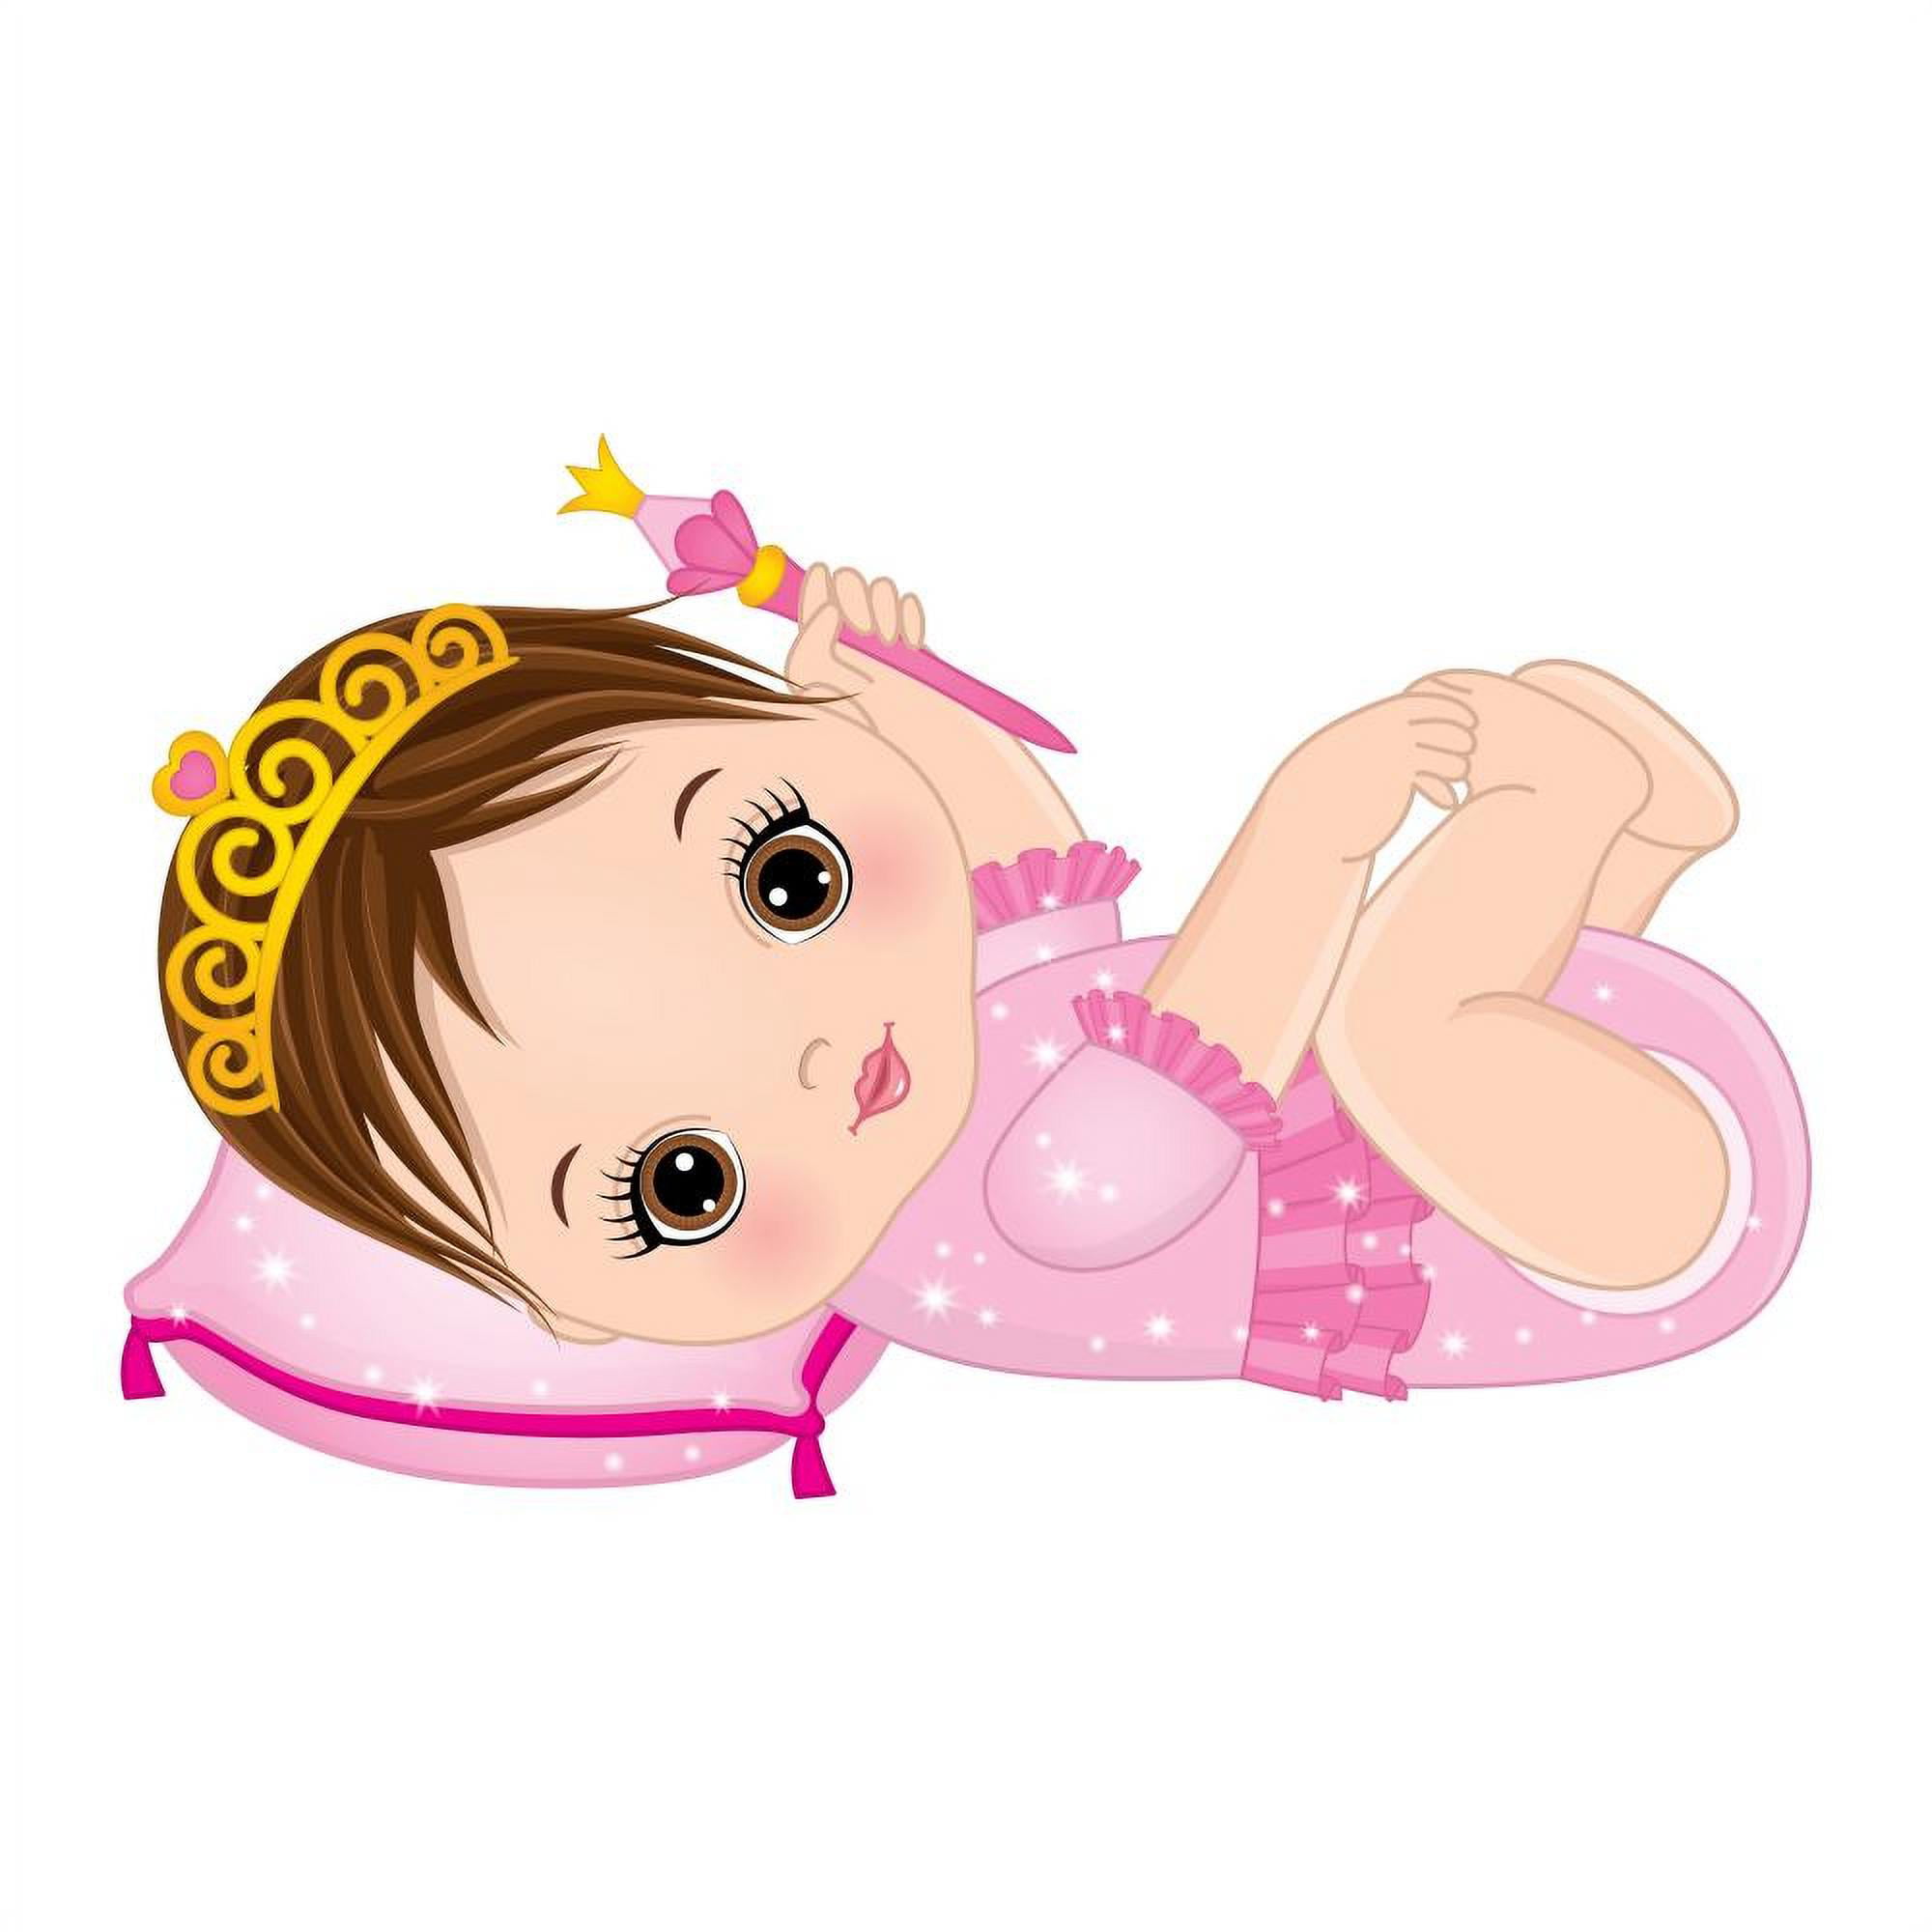 Hush Little Baby Stickers 12 inch x12 inch Baby Girl Elements